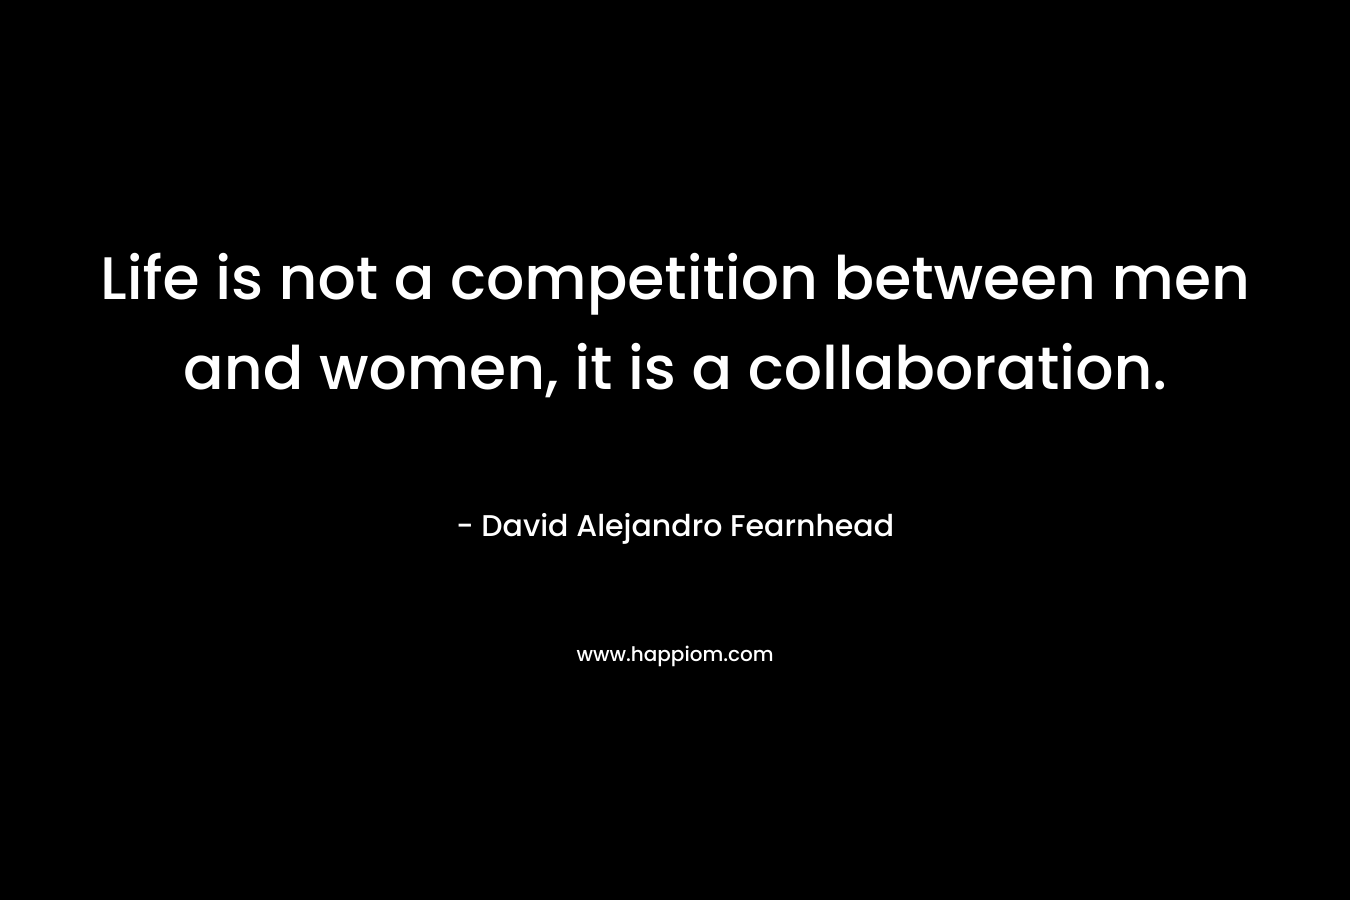 Life is not a competition between men and women, it is a collaboration.